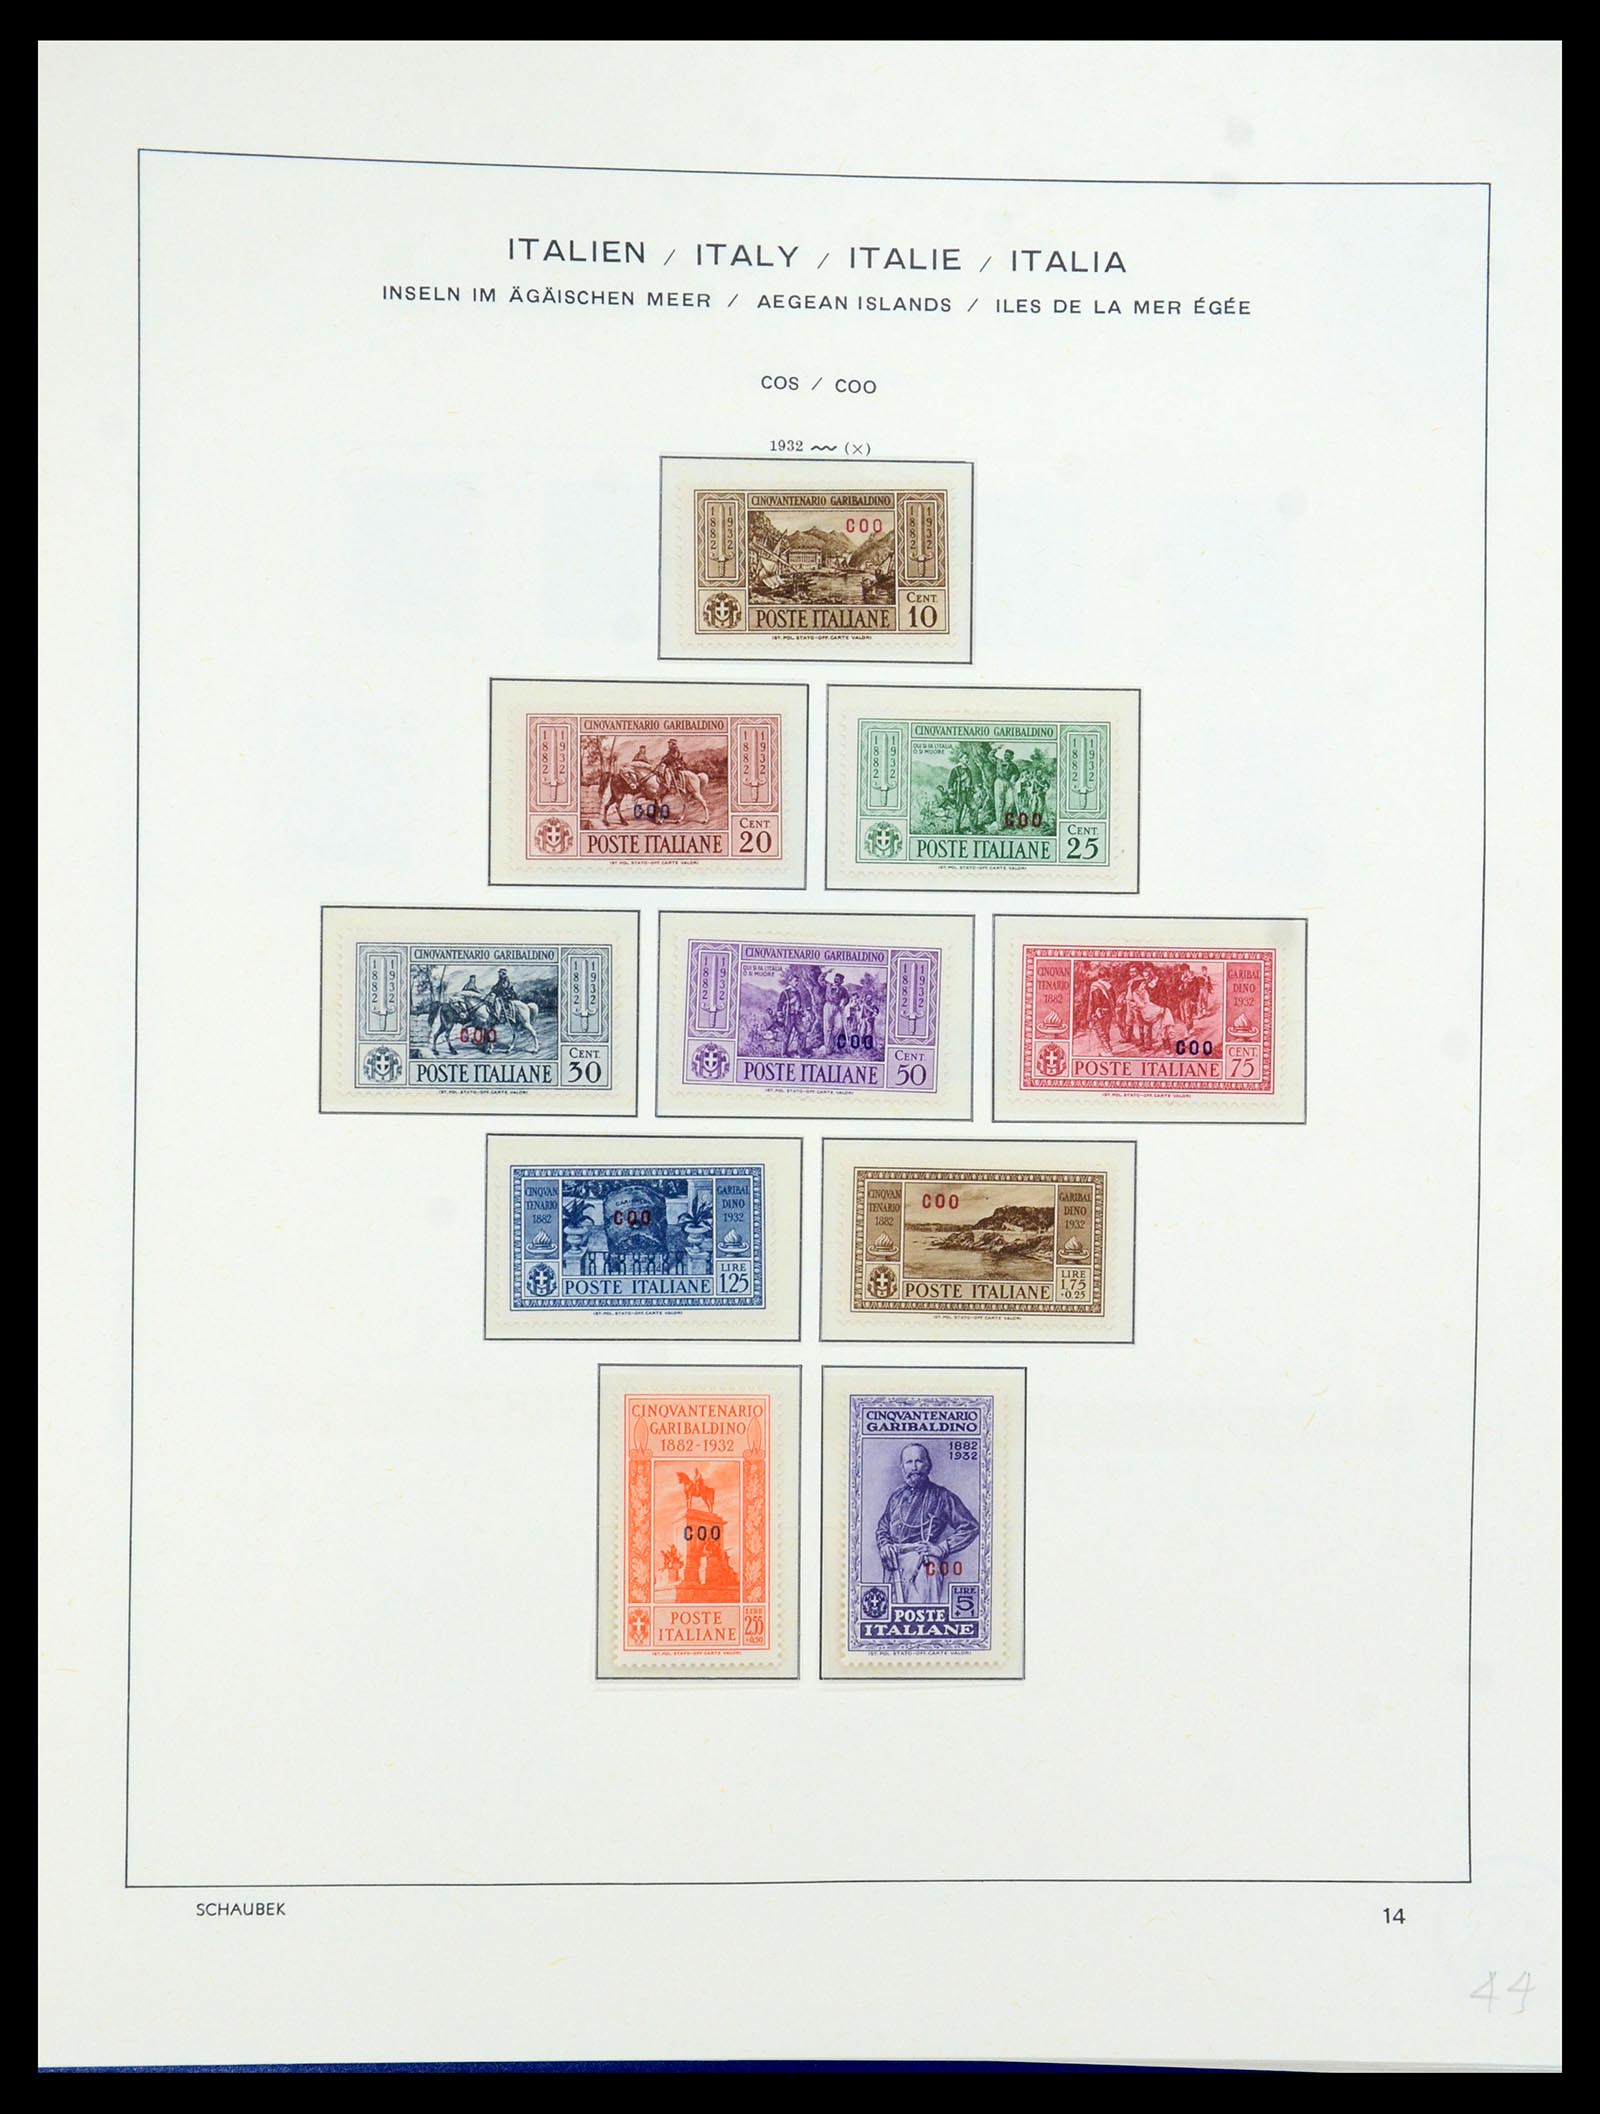 36181 017 - Stamp collection 36181 Italian Aegean Islands 1912-1941.